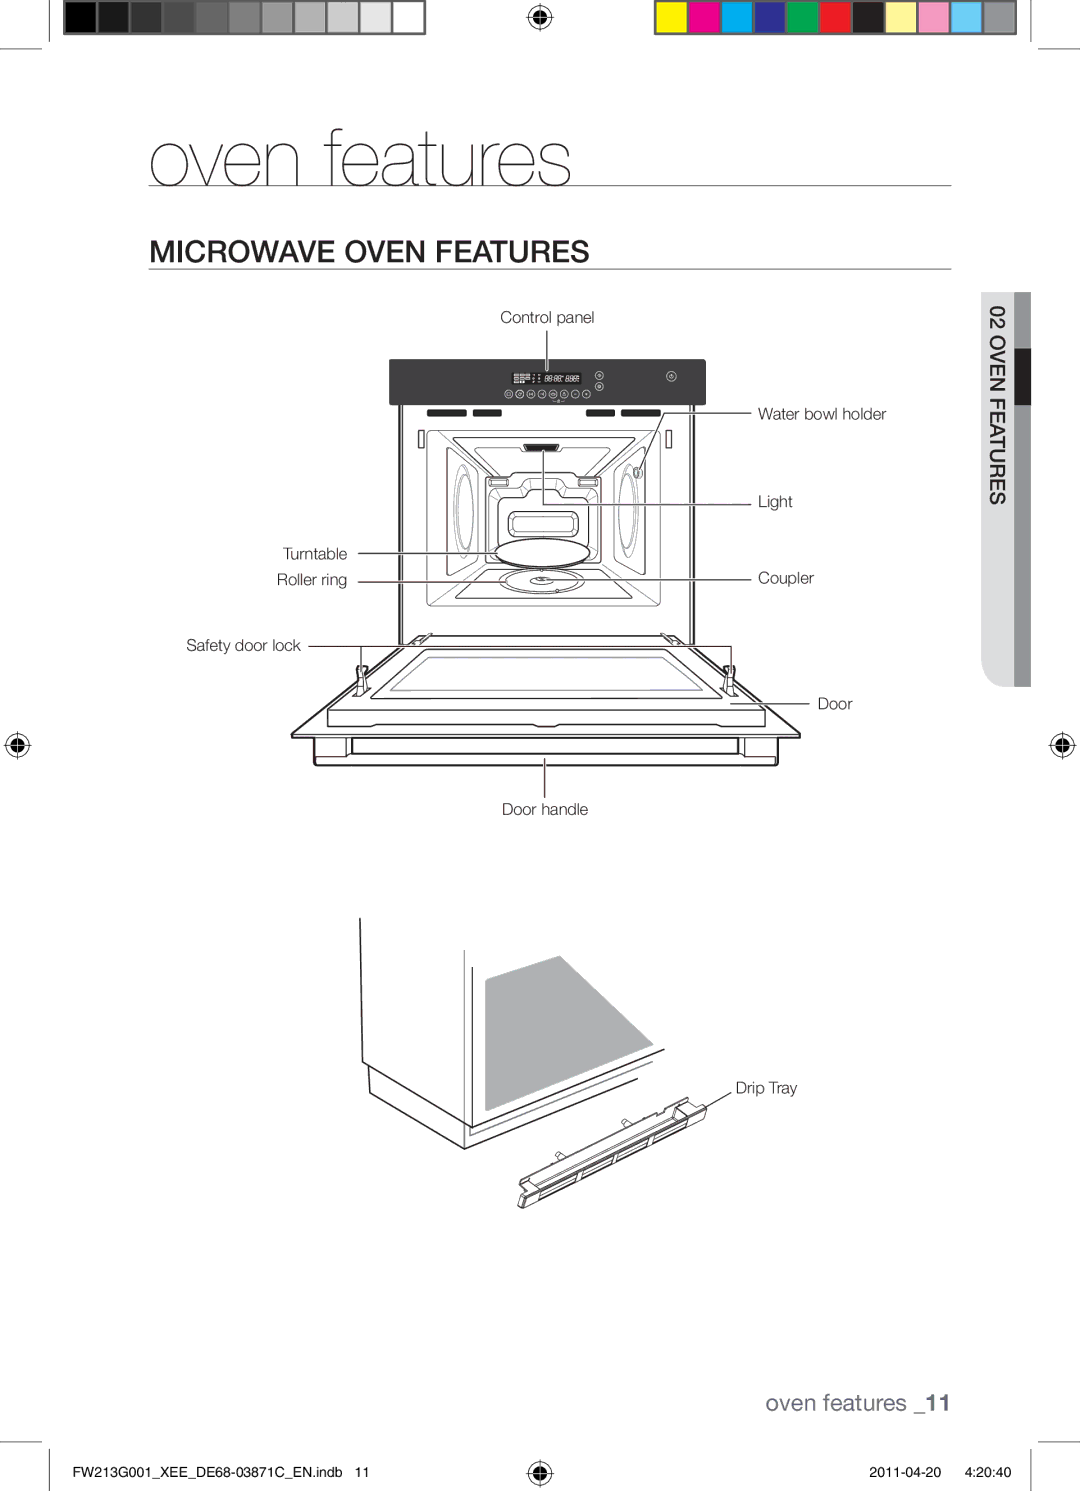 Samsung FW213G001/XEE manual Oven features, Microwave Oven Features 